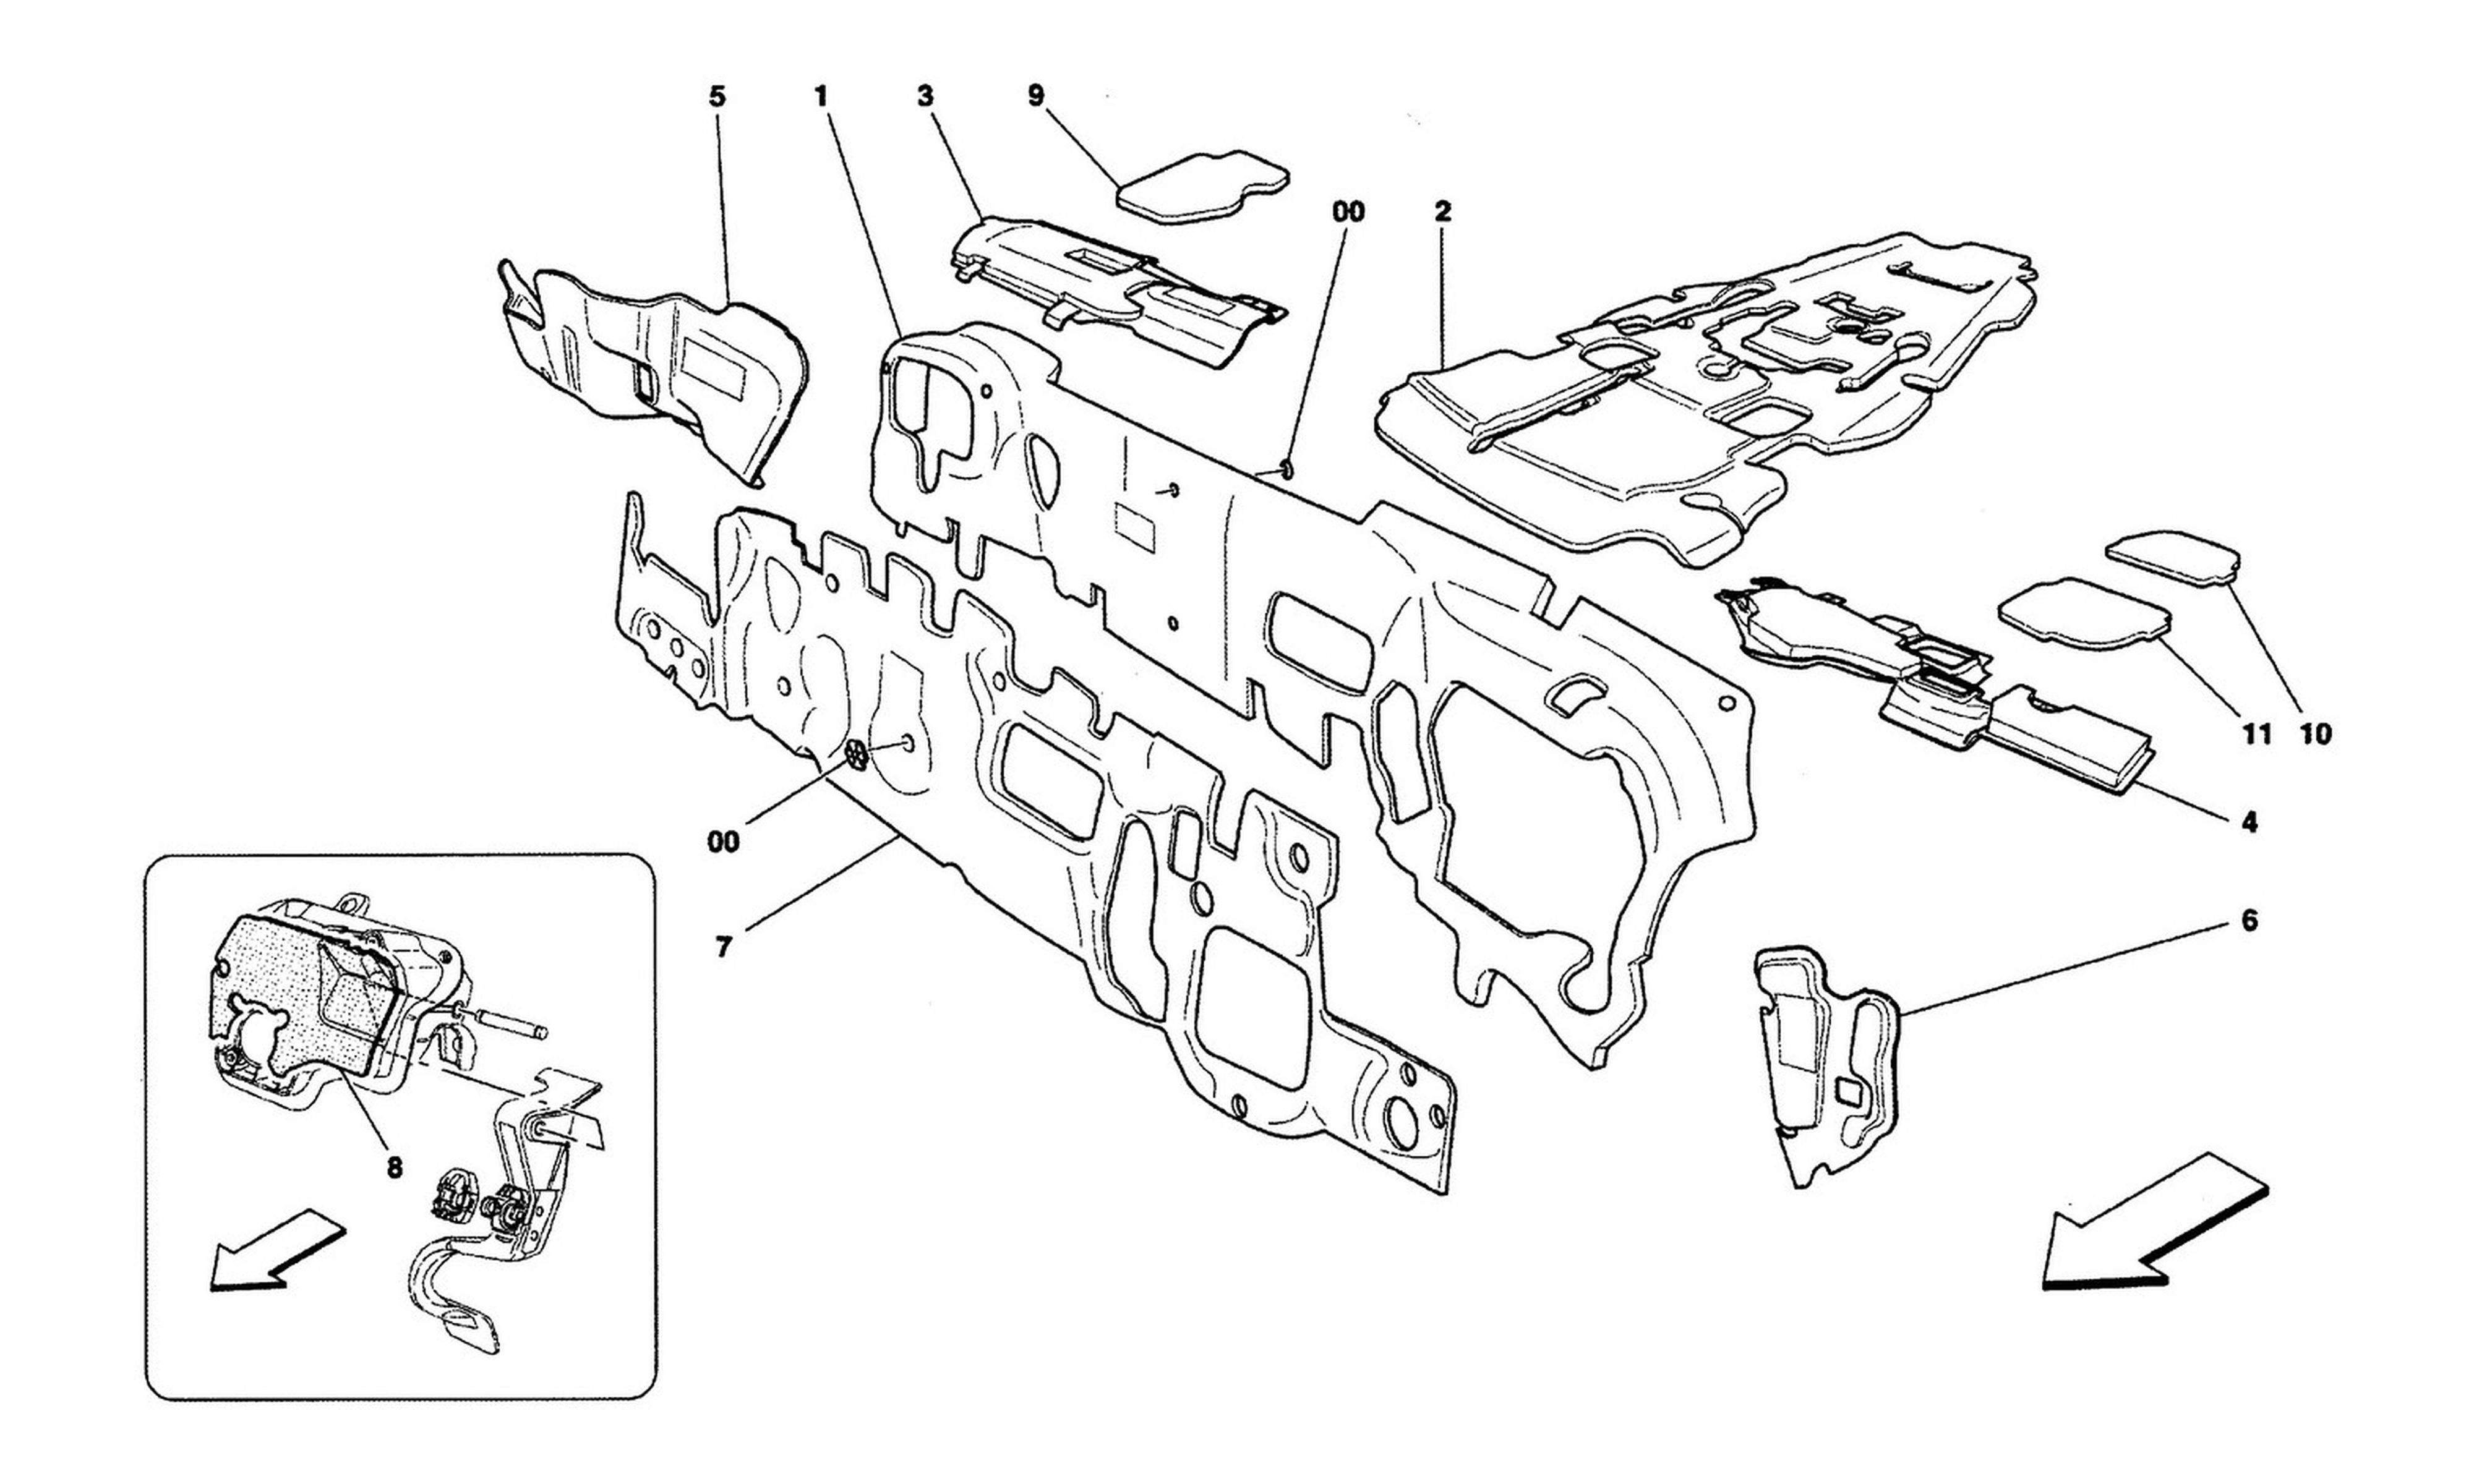 Schematic: Sound-Proofing Panels Inside The Vehicle